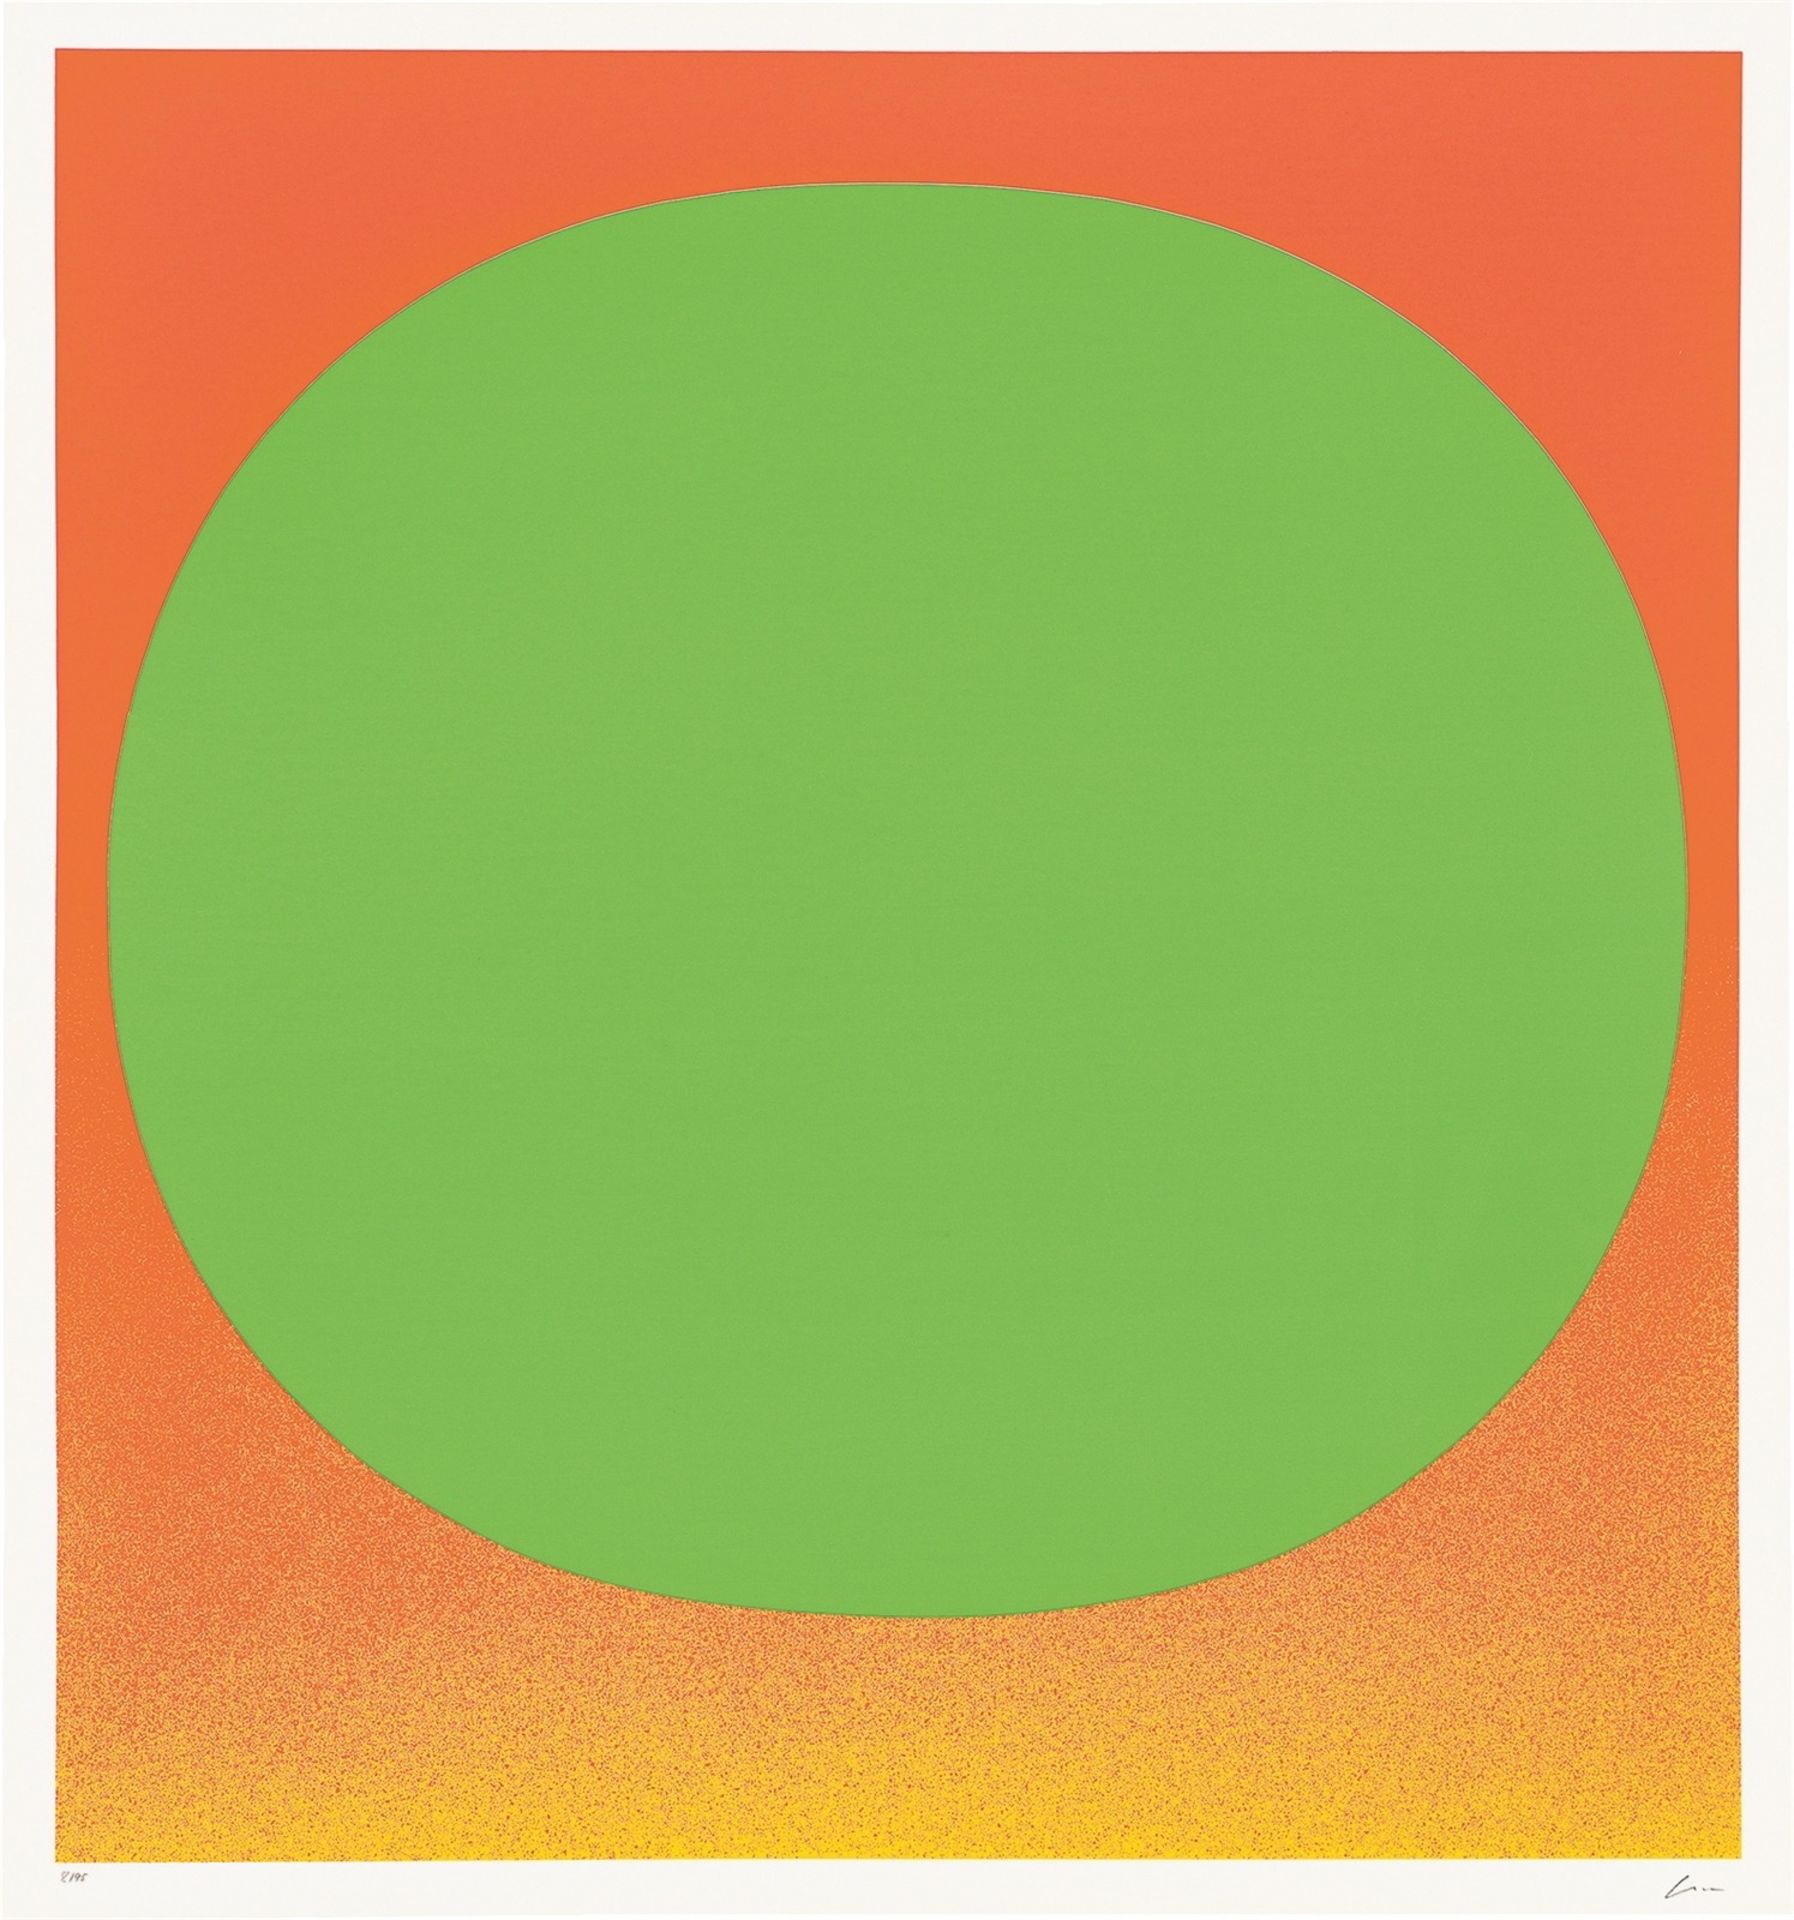 Rupprecht Geiger. Untitled, from ”Colour in the round”. 1969 - Image 4 of 5